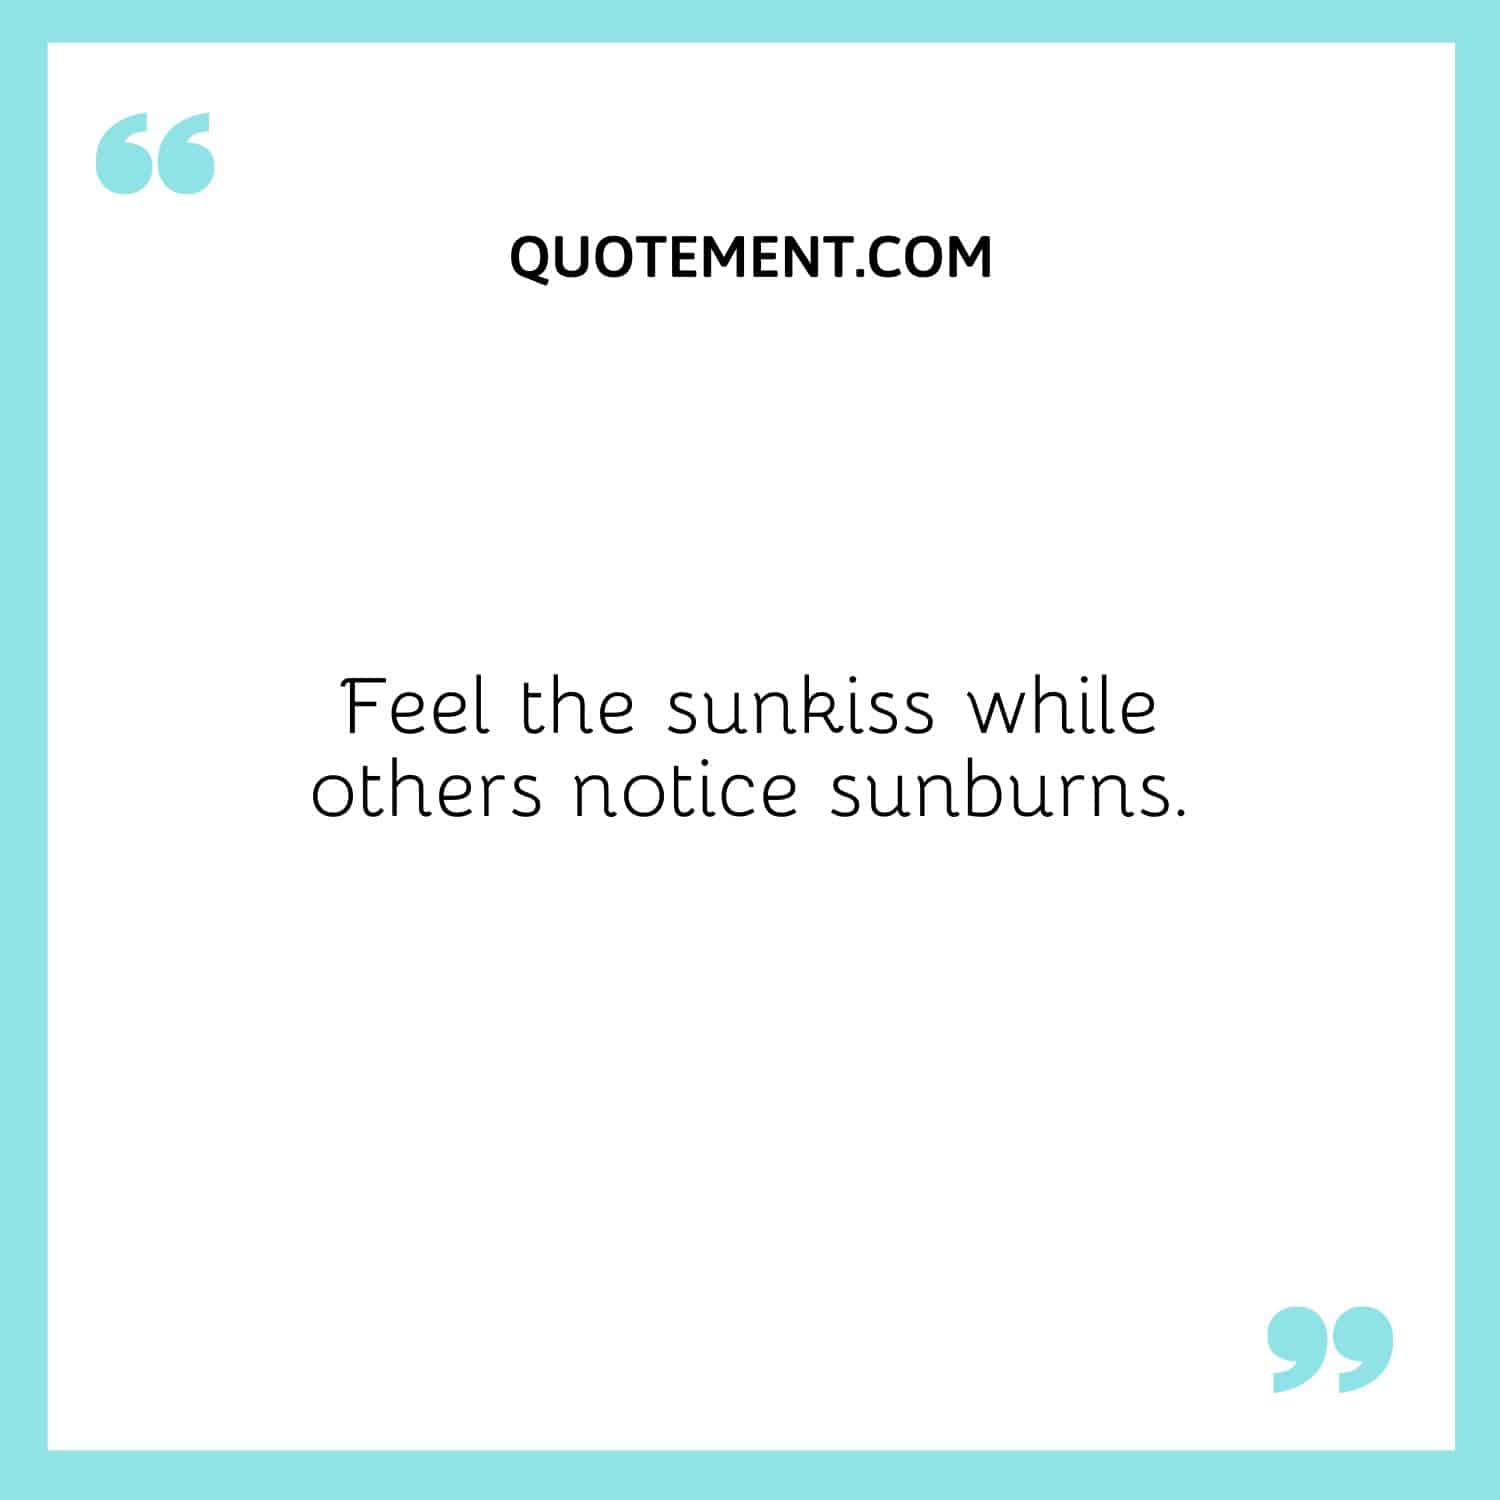 Feel the sunkiss while others notice sunburns.